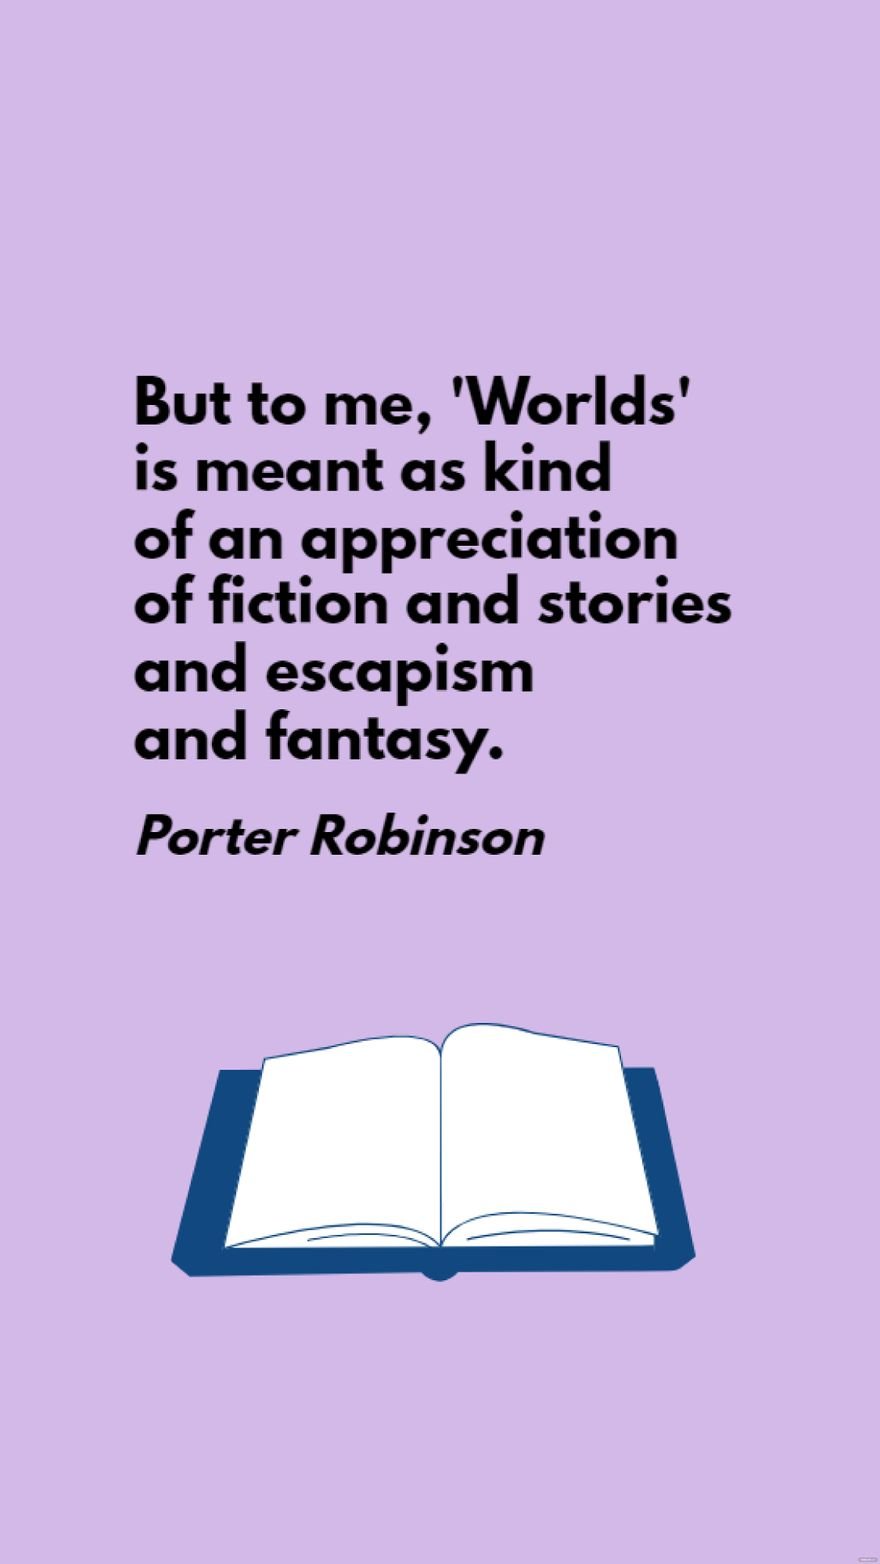 Free Porter Robinson - But to me, 'Worlds' is meant as kind of an appreciation of fiction and stories and escapism and fantasy. in JPG